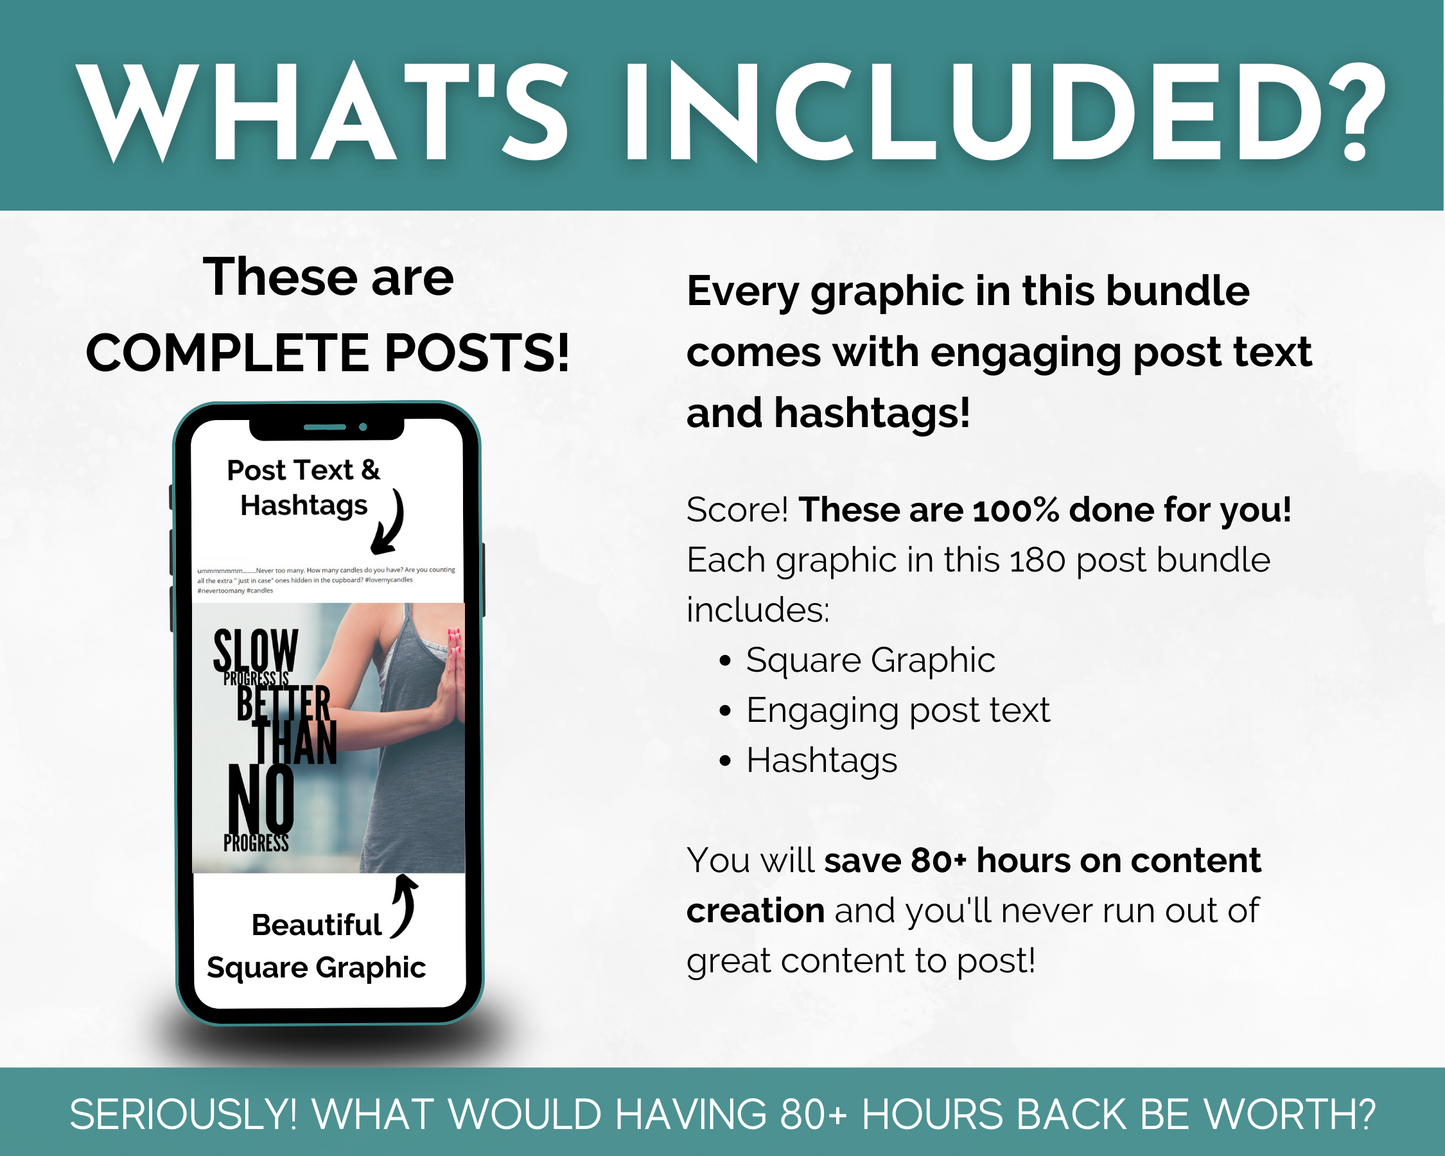 What's included in this Fitness & Wellness Influencers Social Media Post Bundle - NO Canva Templates package by Socially Inclined? You will receive a variety of fitness content and social media images to enhance your online presence.